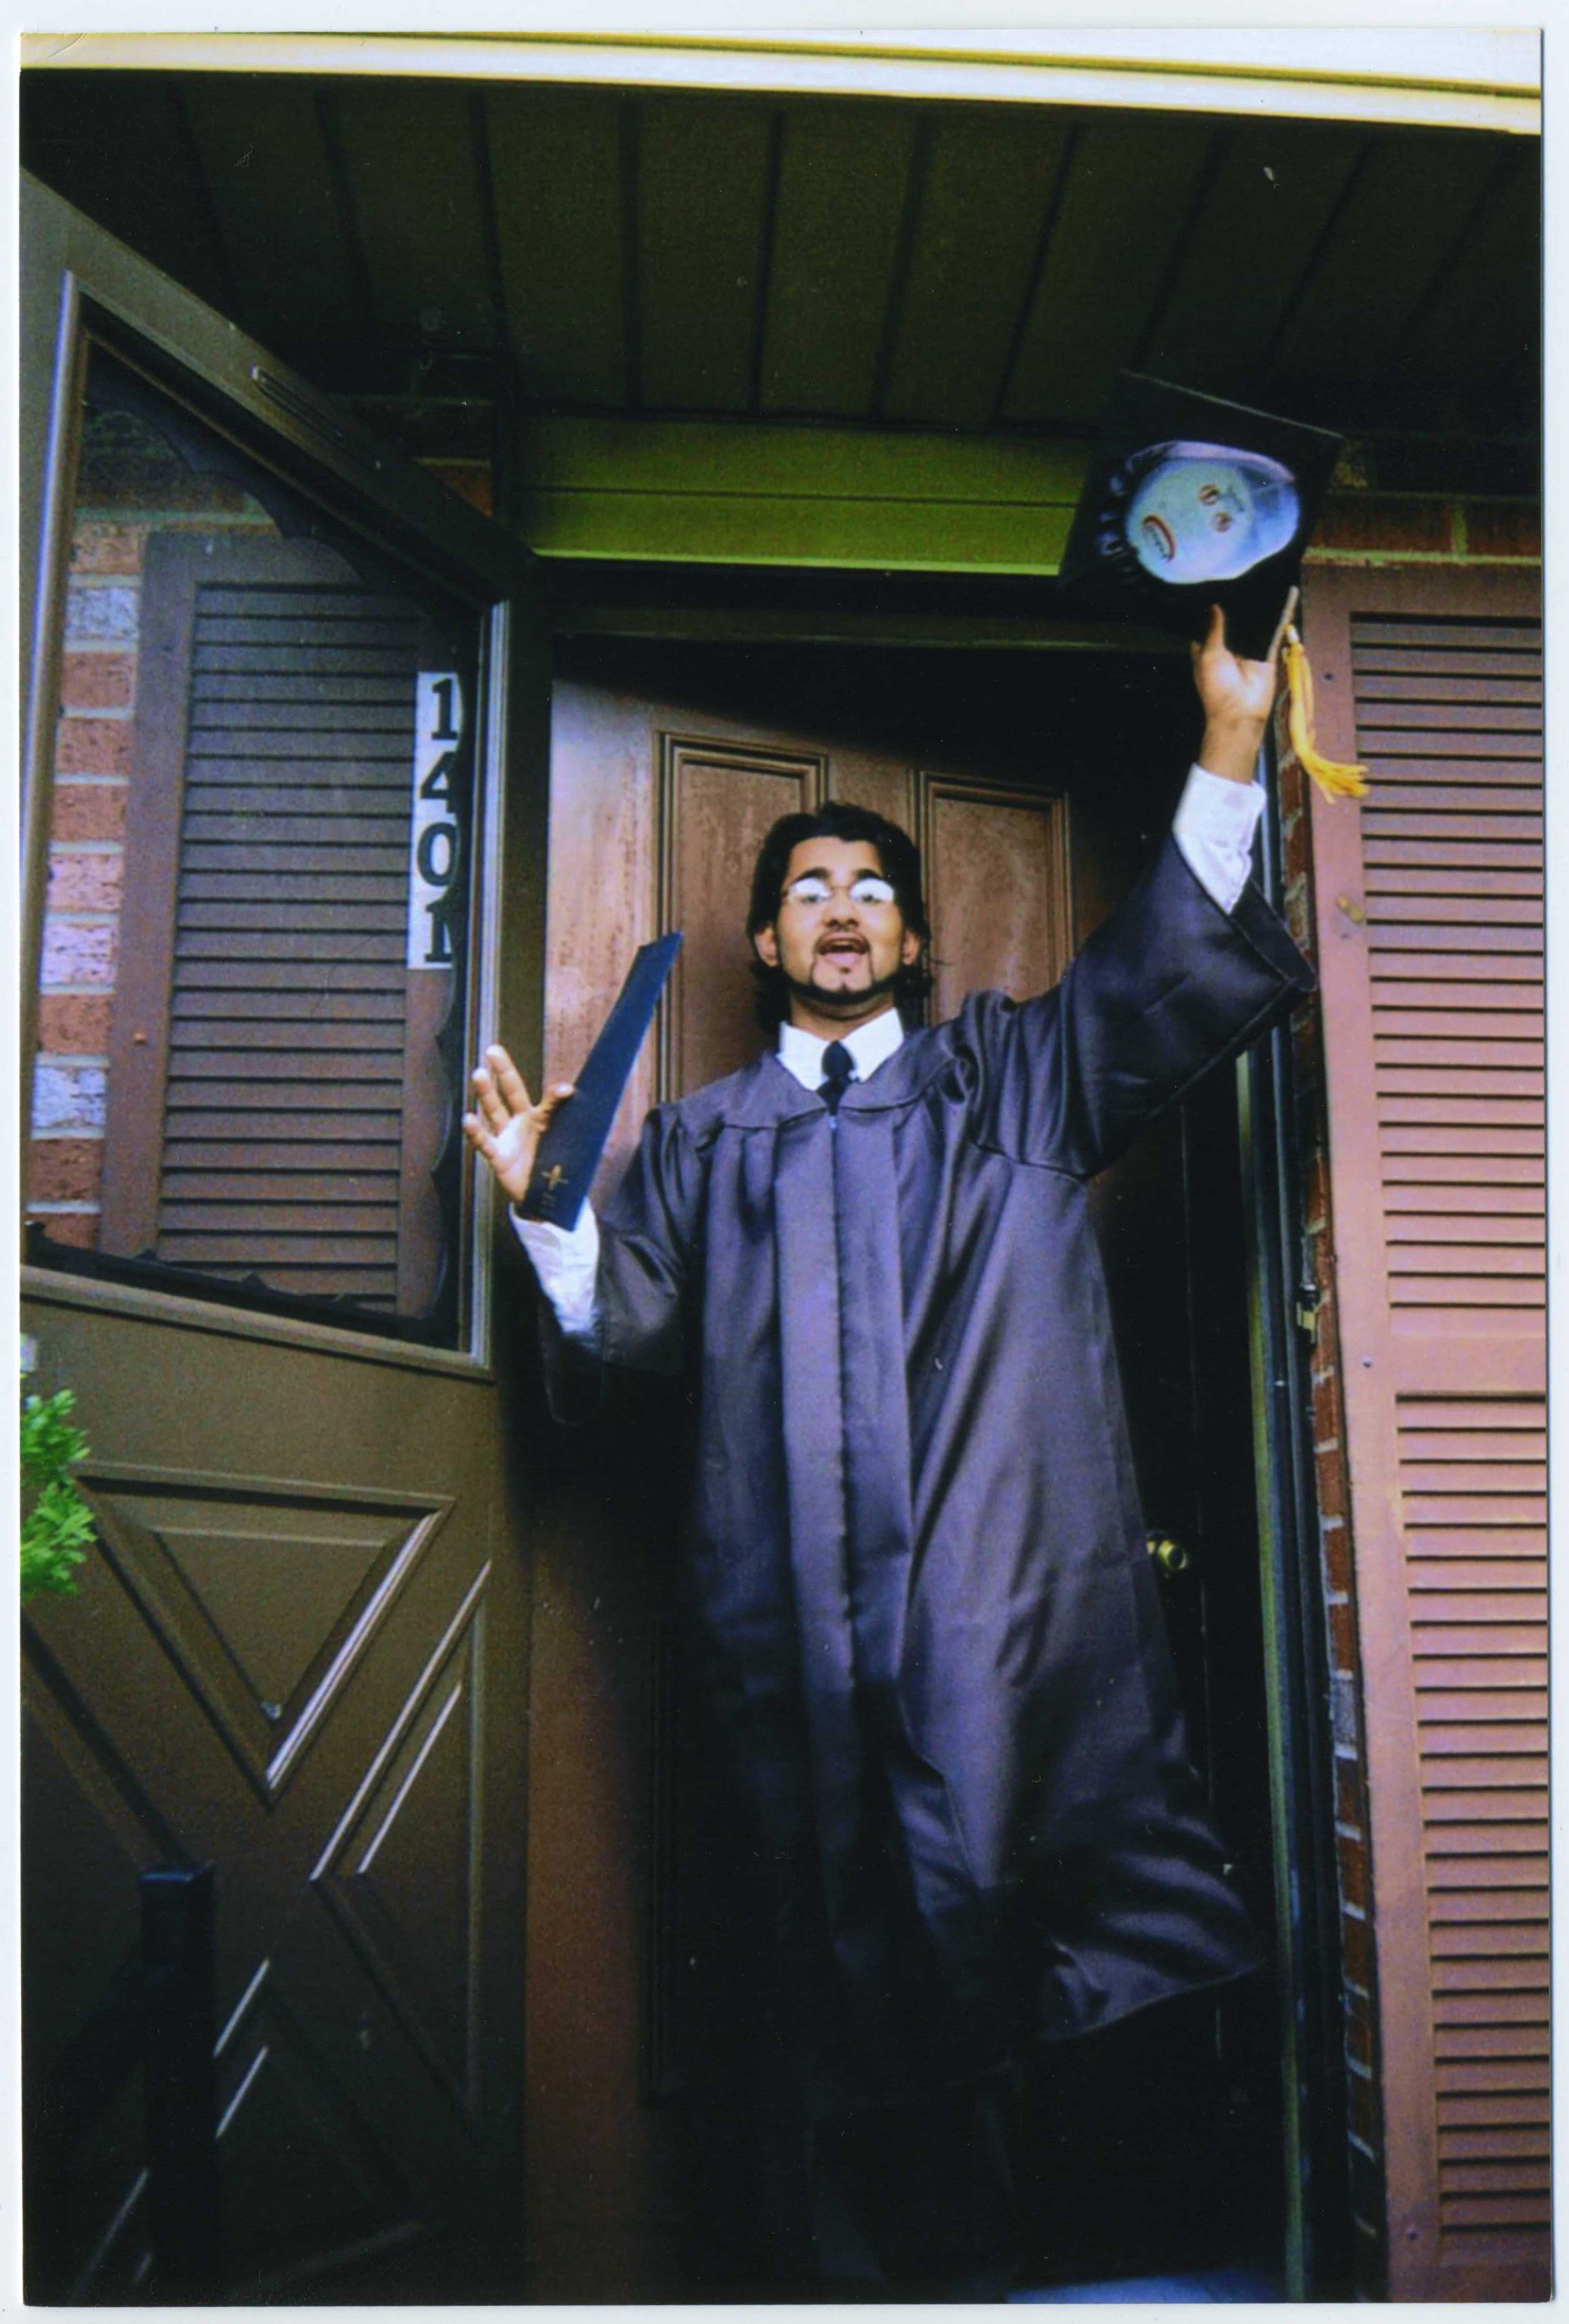 Al-Qaeda terrorist Majid Khan in a 1999 high school graduation photo in Baltimore. Now 38, Khan is described as the only high-level government informant in Guantanamo Bay. Photo: AP